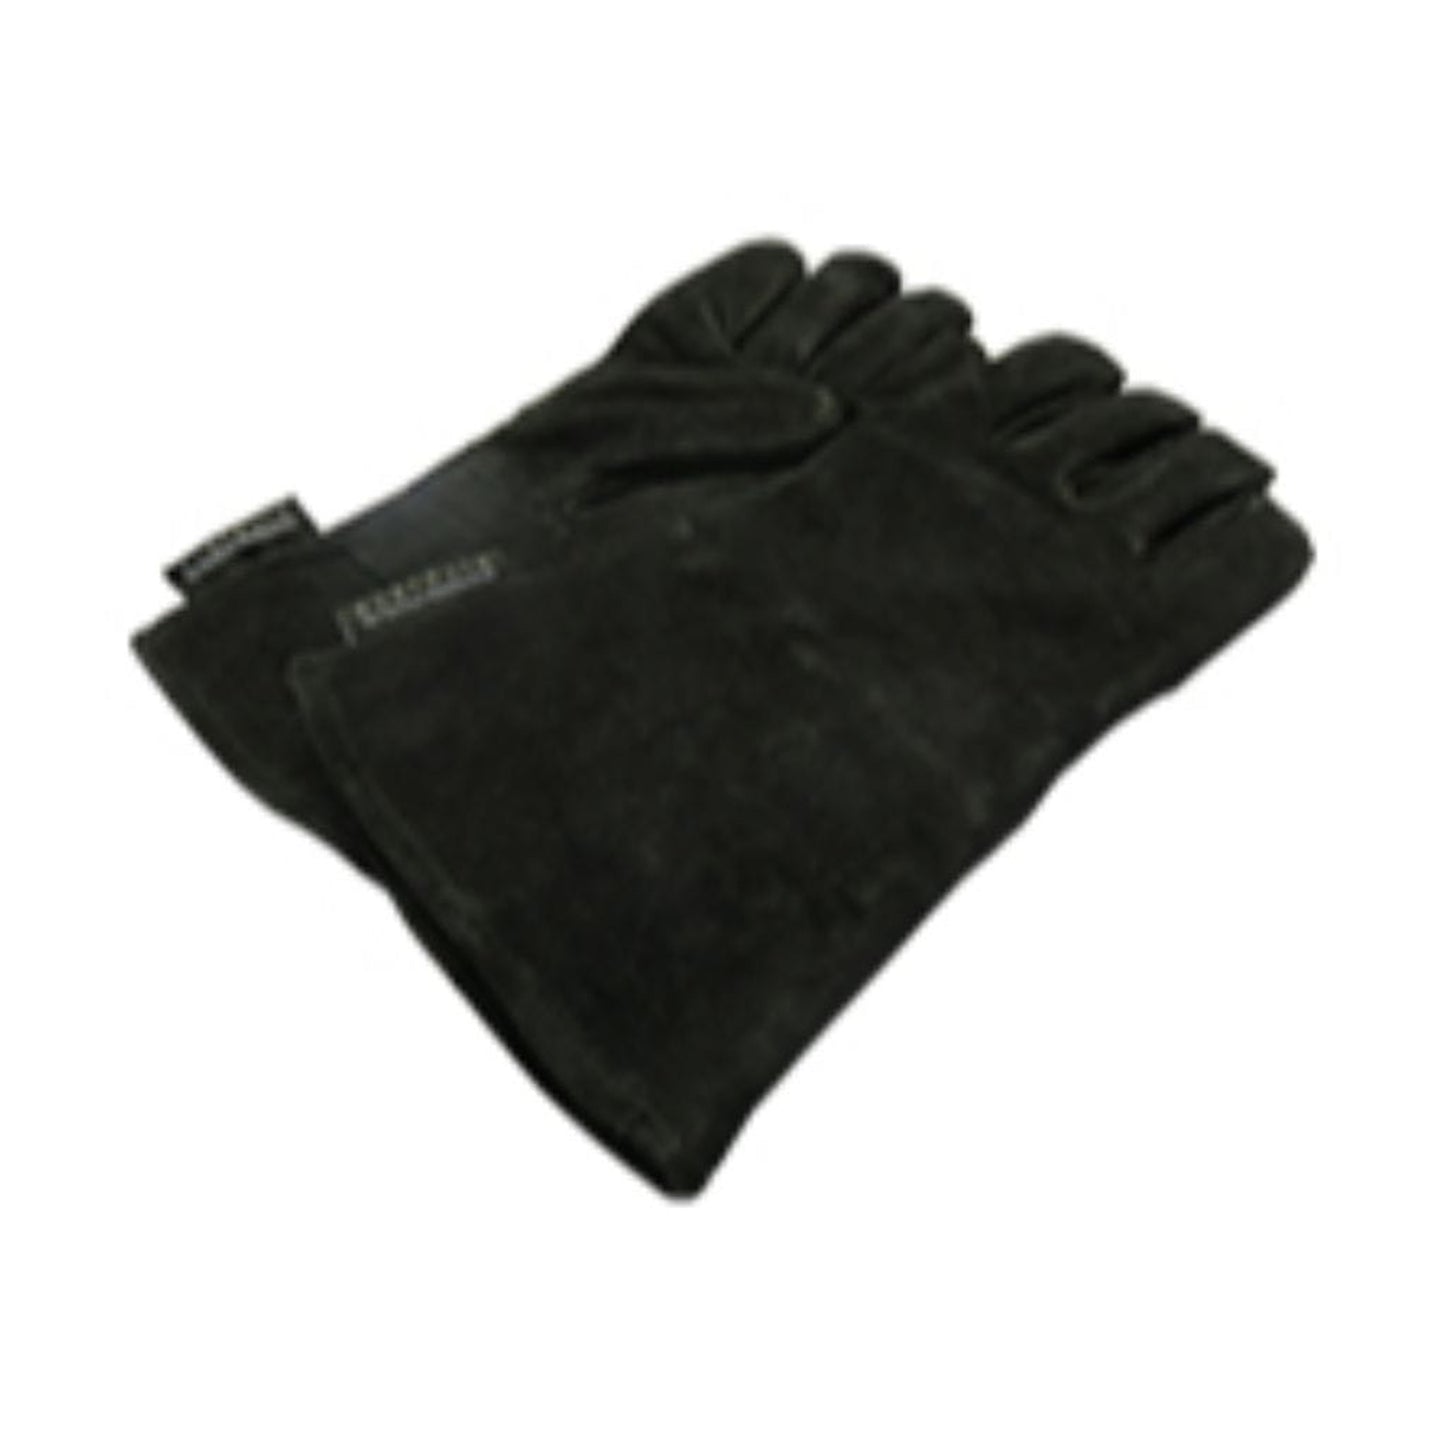 Everdure 1 Pair Large/Extra Large Leather Gloves